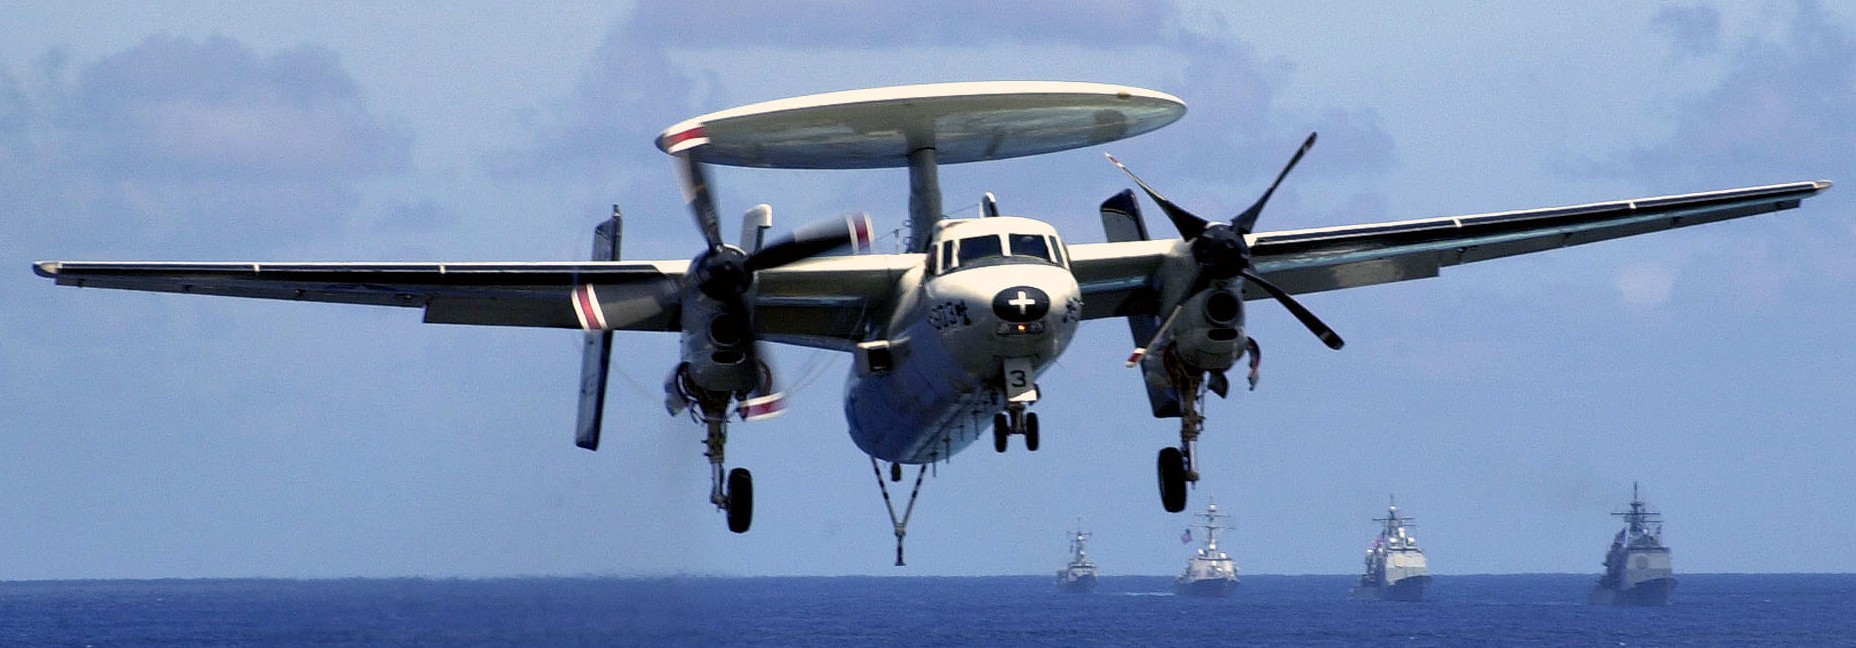 vaw-116 sun kings airborne command control squadron carrier early warning cvw-2 uss constellation cv-64 05